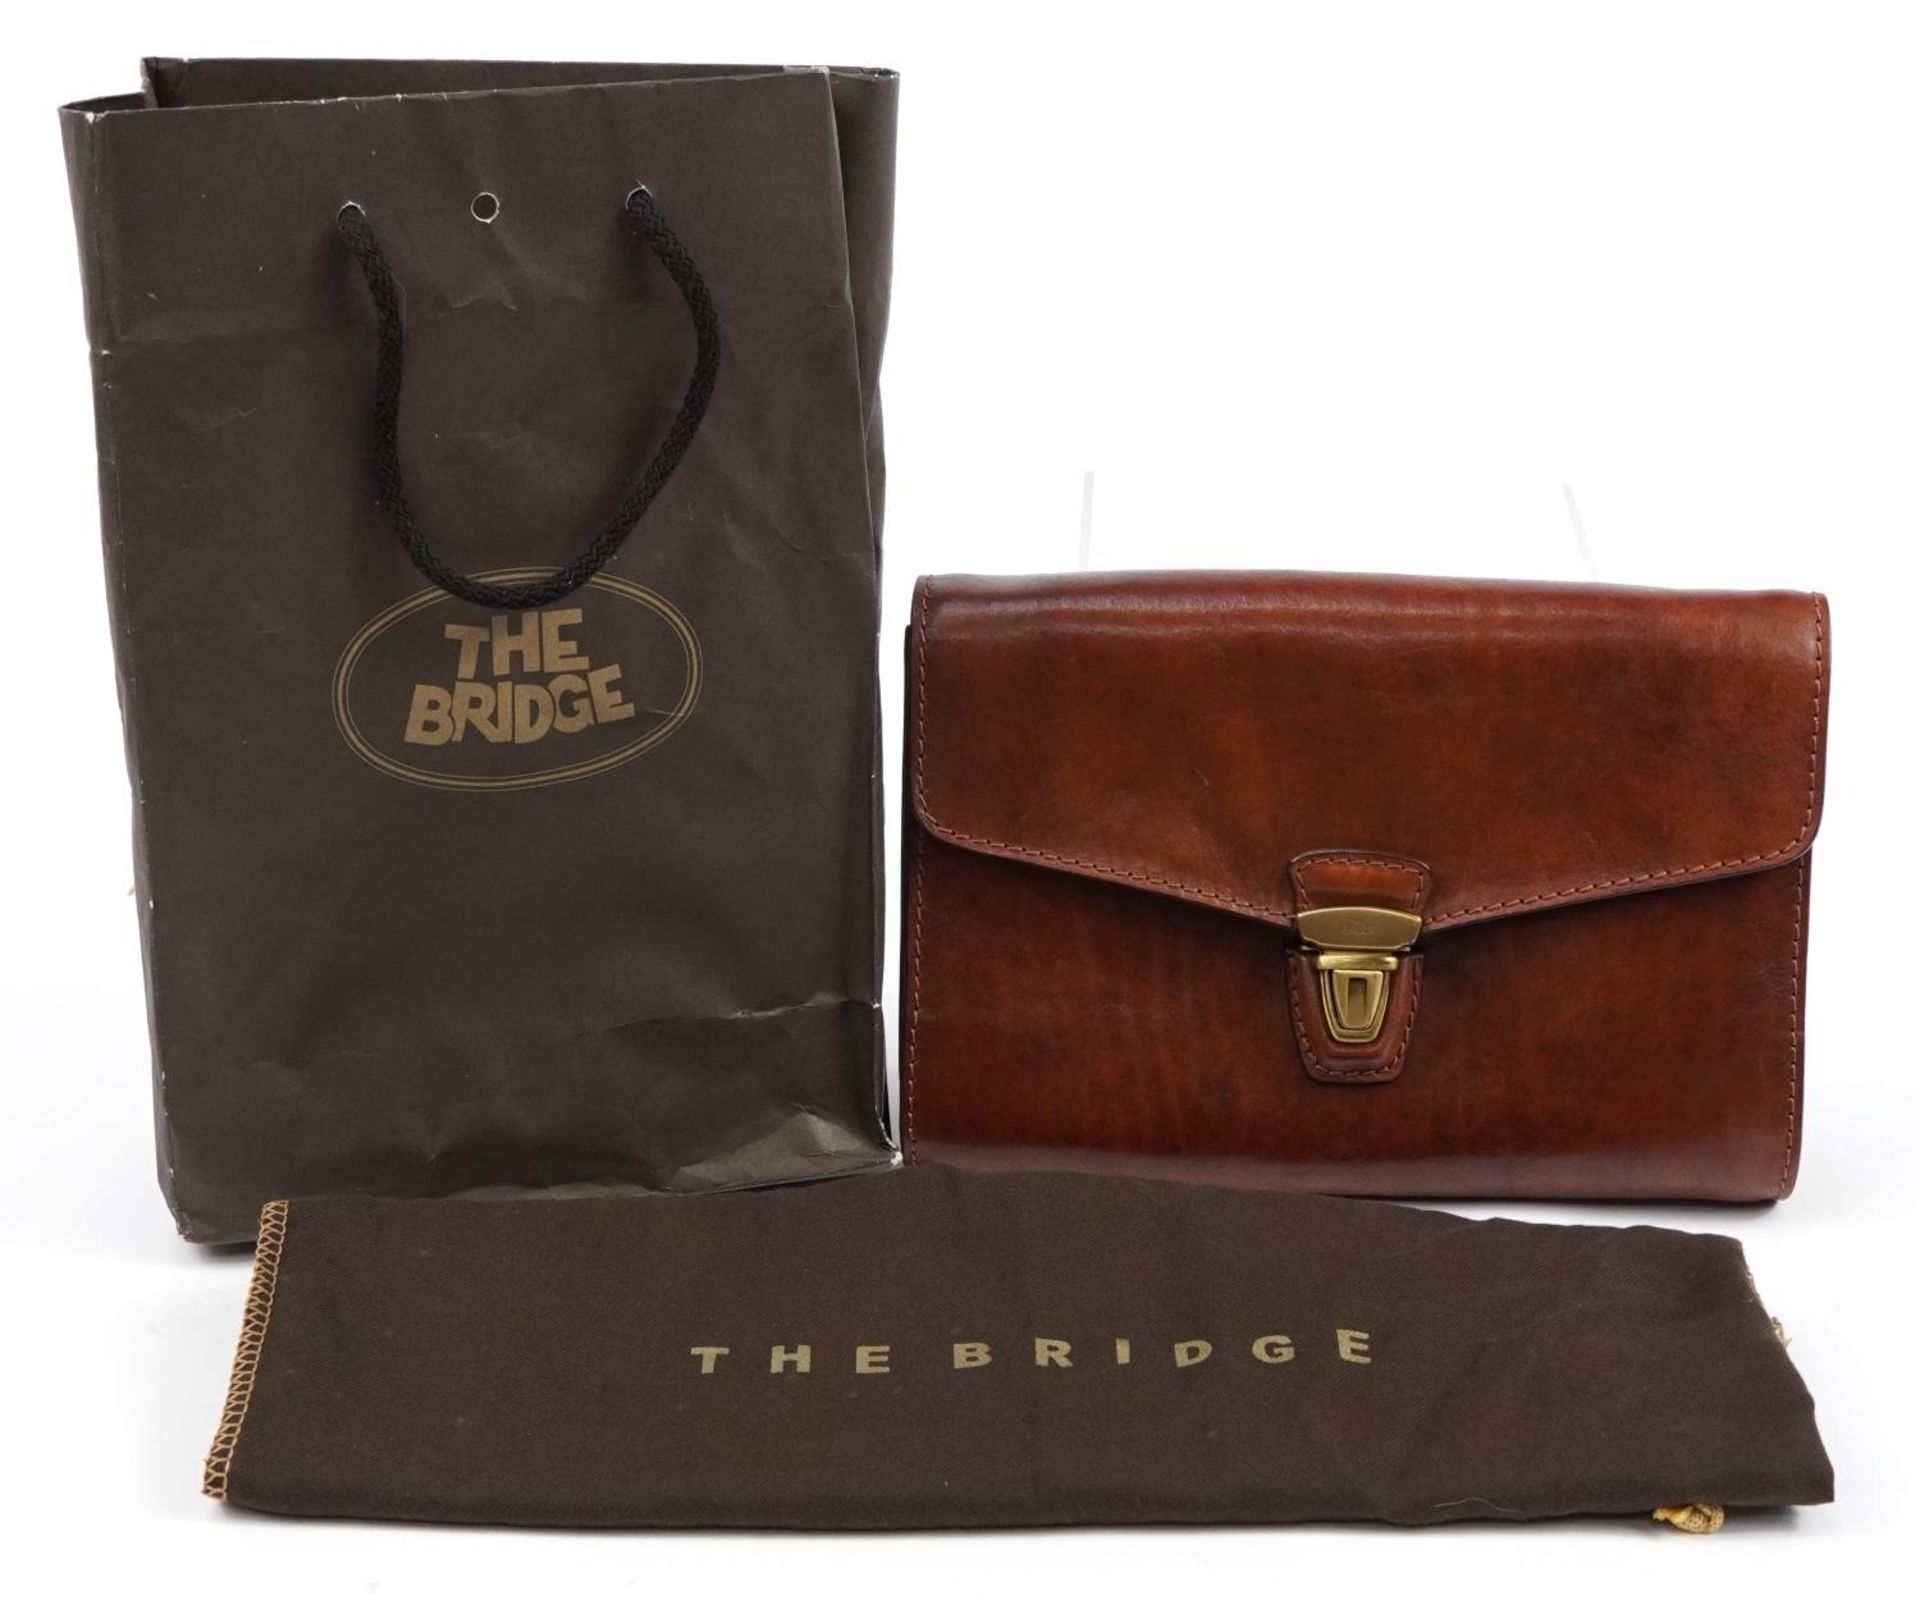 The Bridge, Italian brown leather clutch bag with cloth protective bag, 25.5cm wide - Image 2 of 6